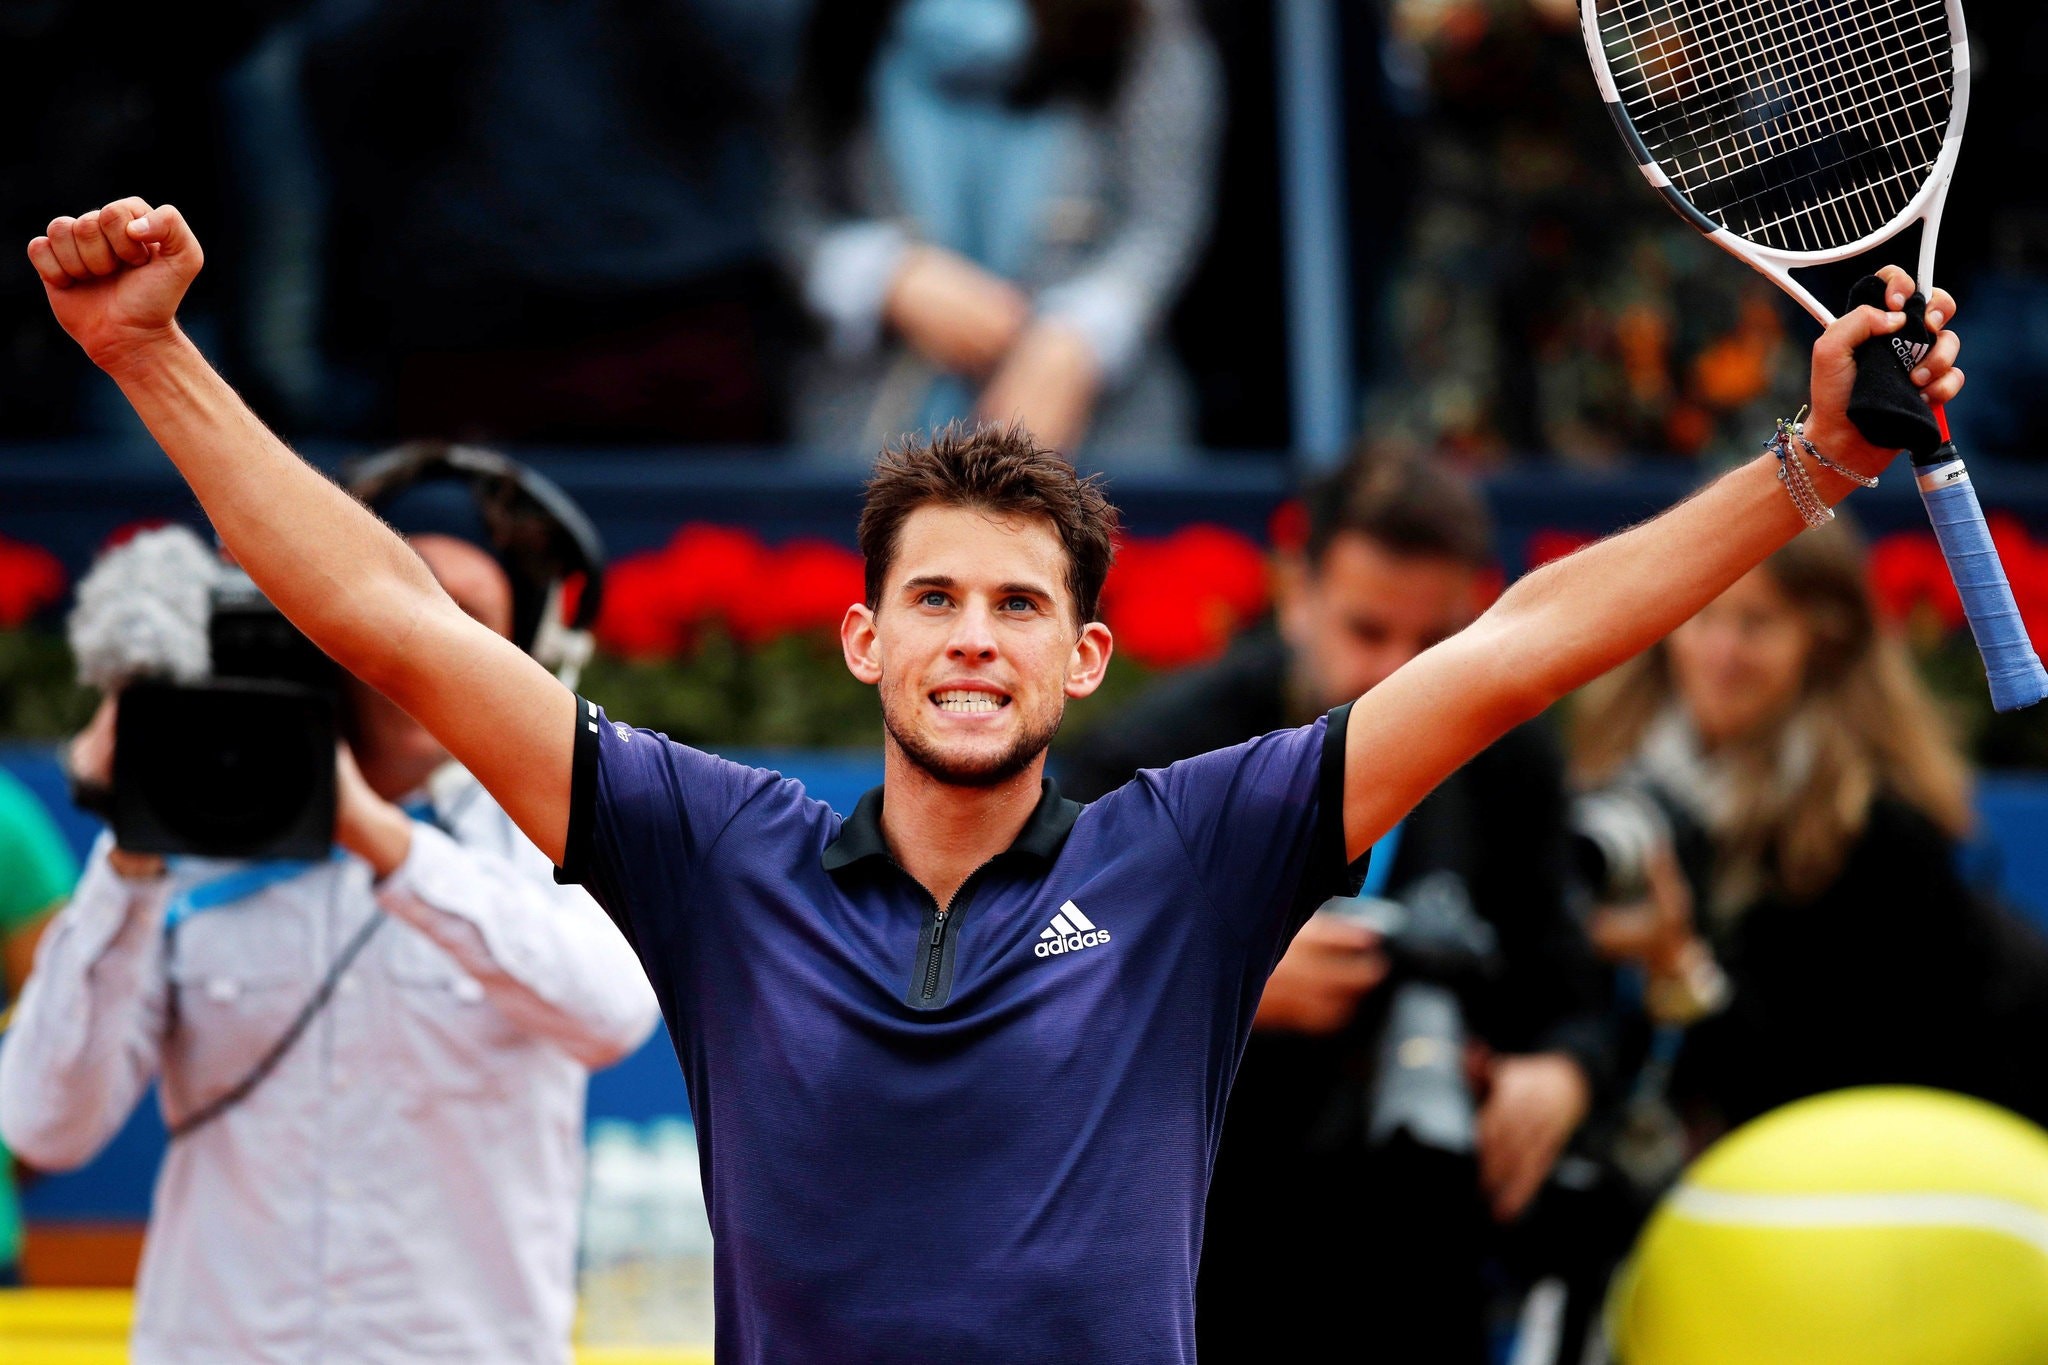 A Noteworthy Year for Dominic Thiem